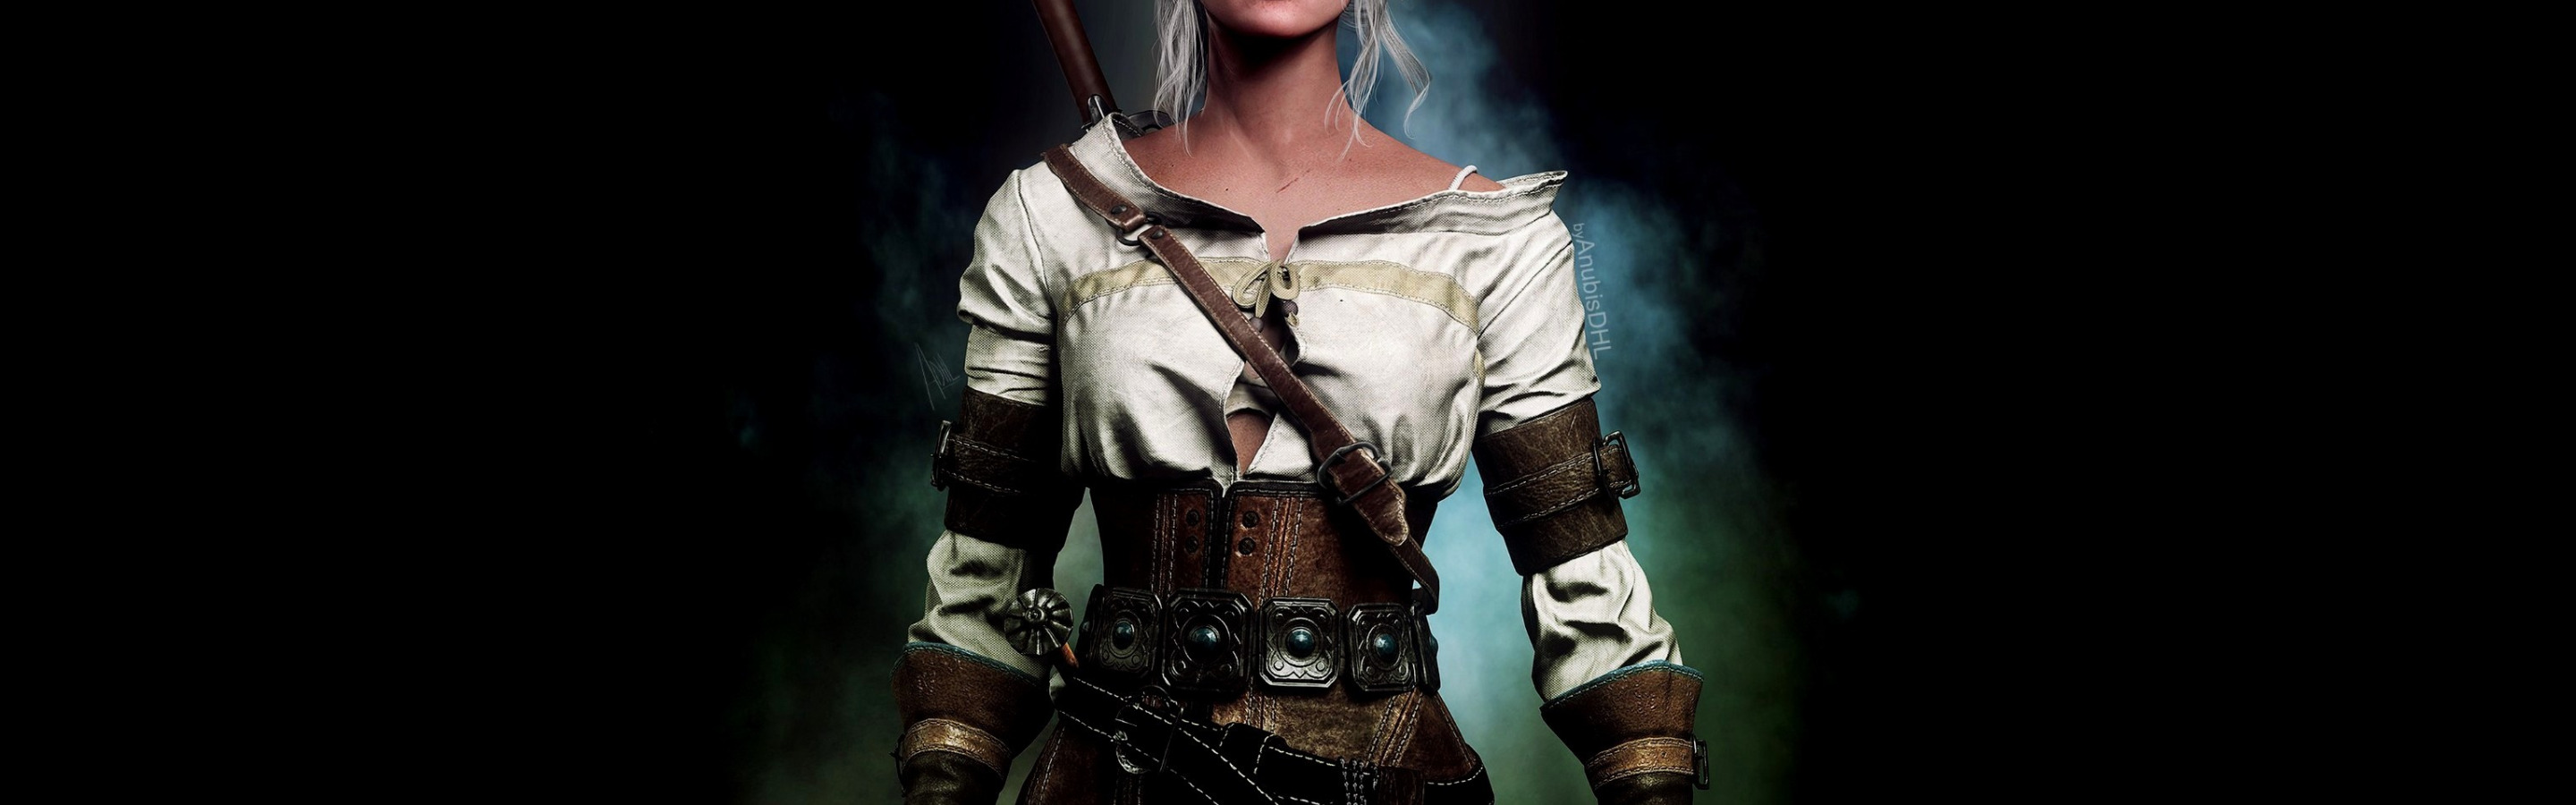 The witcher 3 ciri welcome фото 56